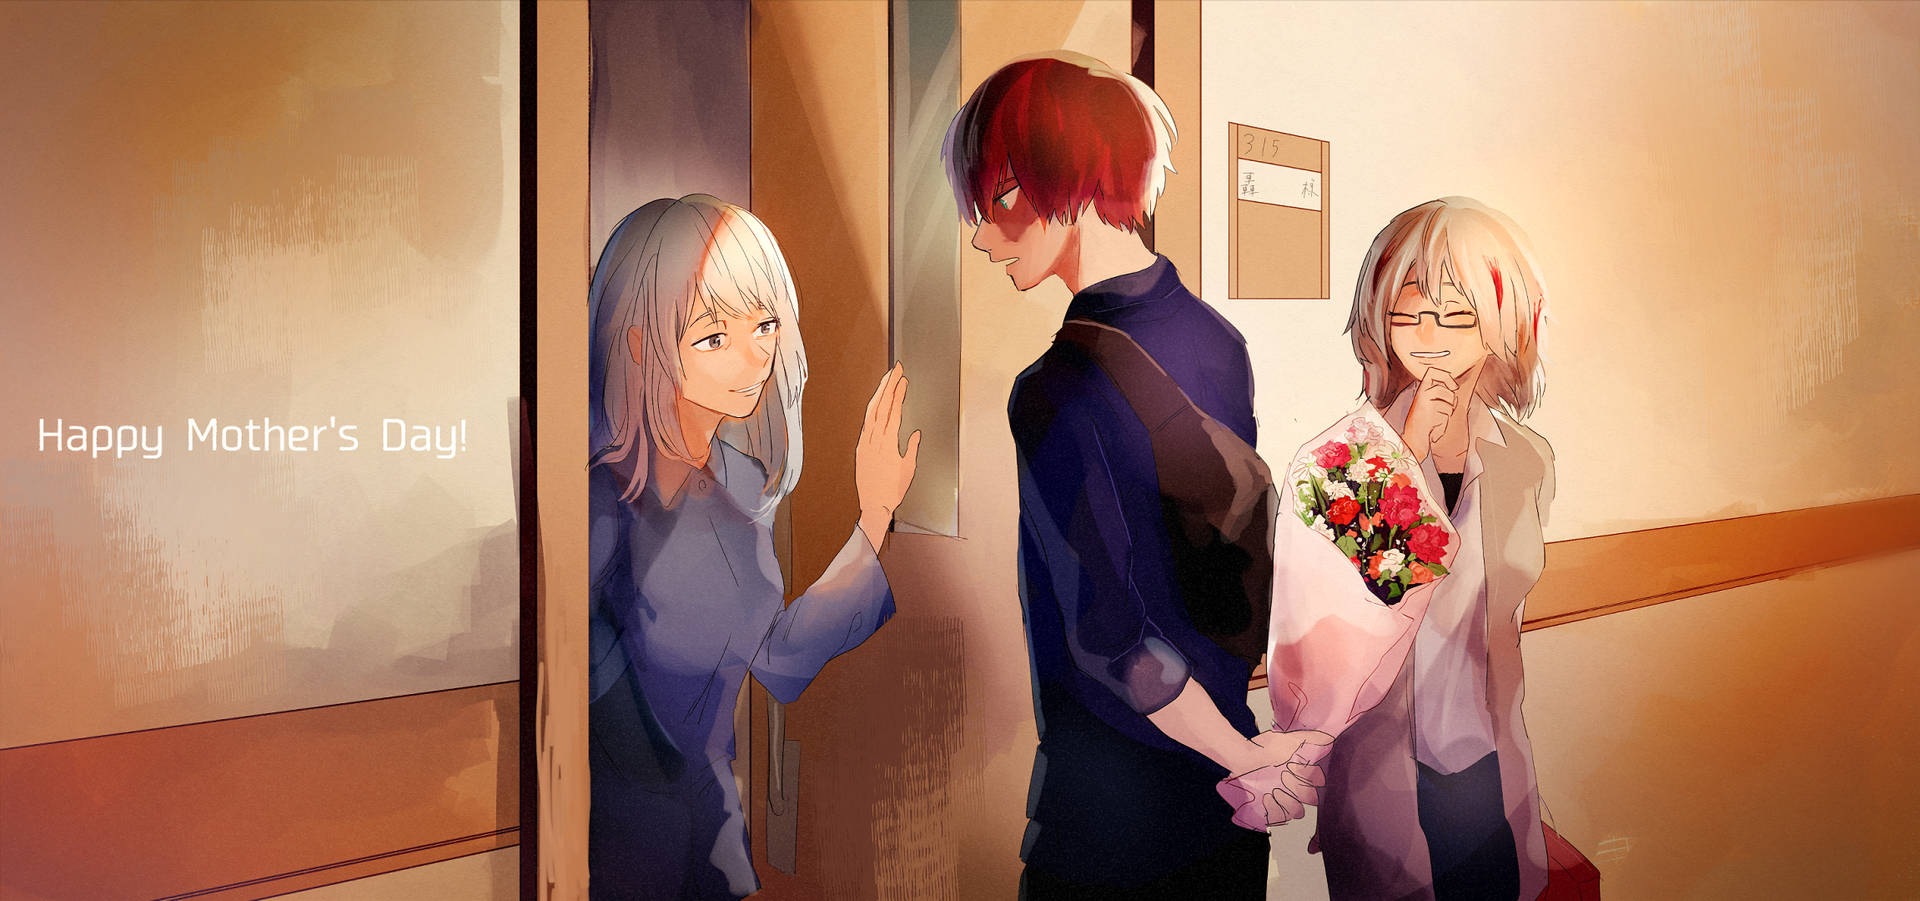 A Touching Moment Of The Todoroki Family Celebrating Mother's Day